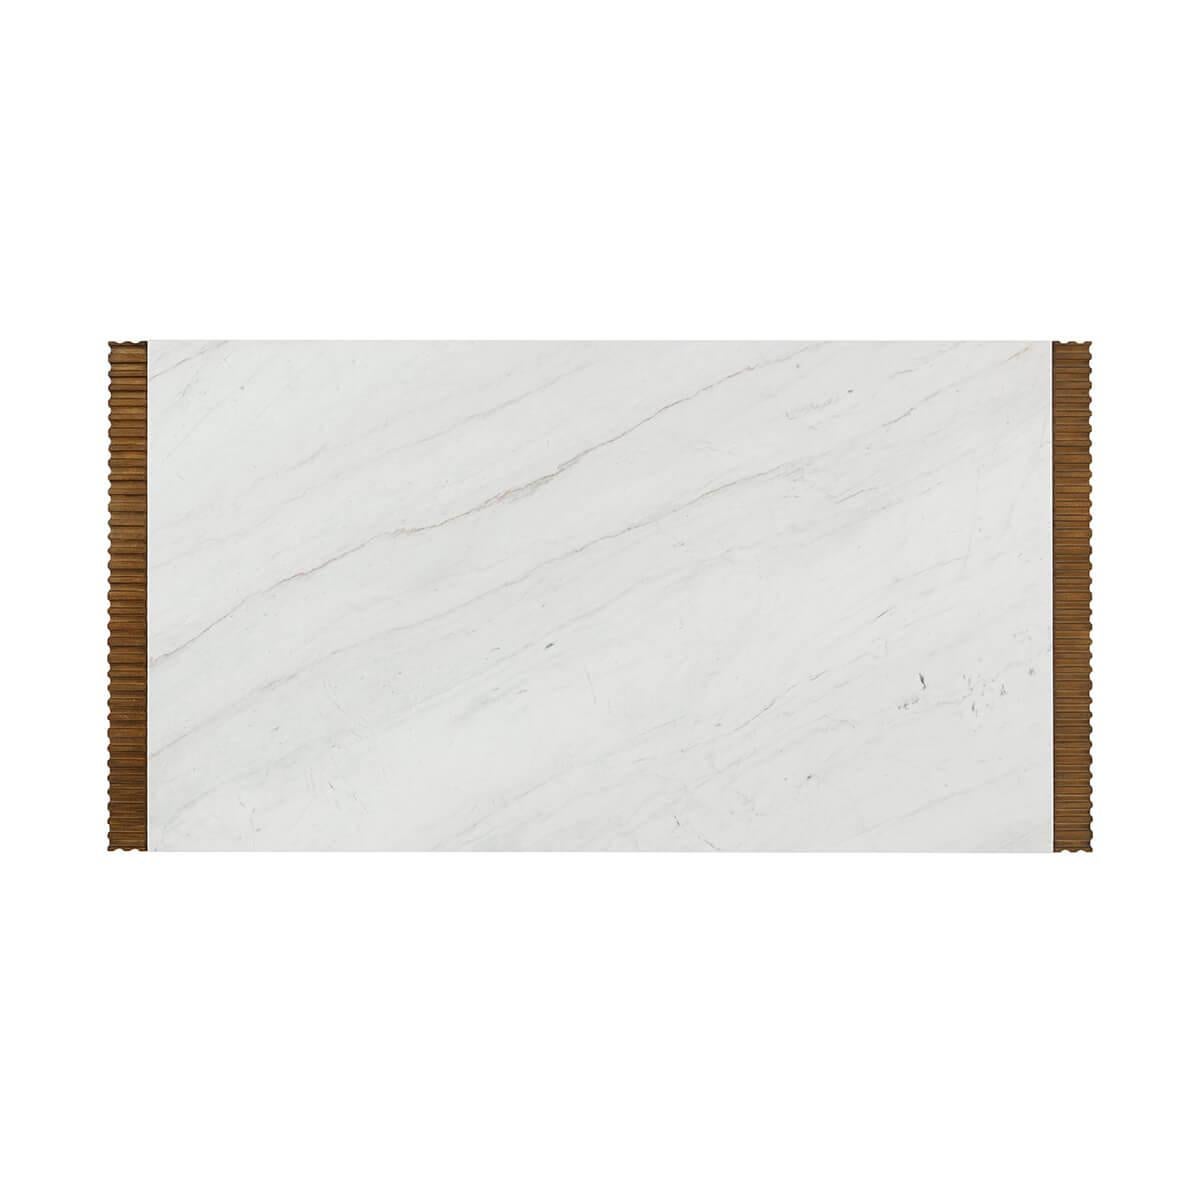 Featuring a rhythmic reeded pattern in our Gelato finish, marble top, and brass base. The perfect combination of organic sophistication and contemporary style. With a lower shelf that offers generous storage.

Dimensions: 54